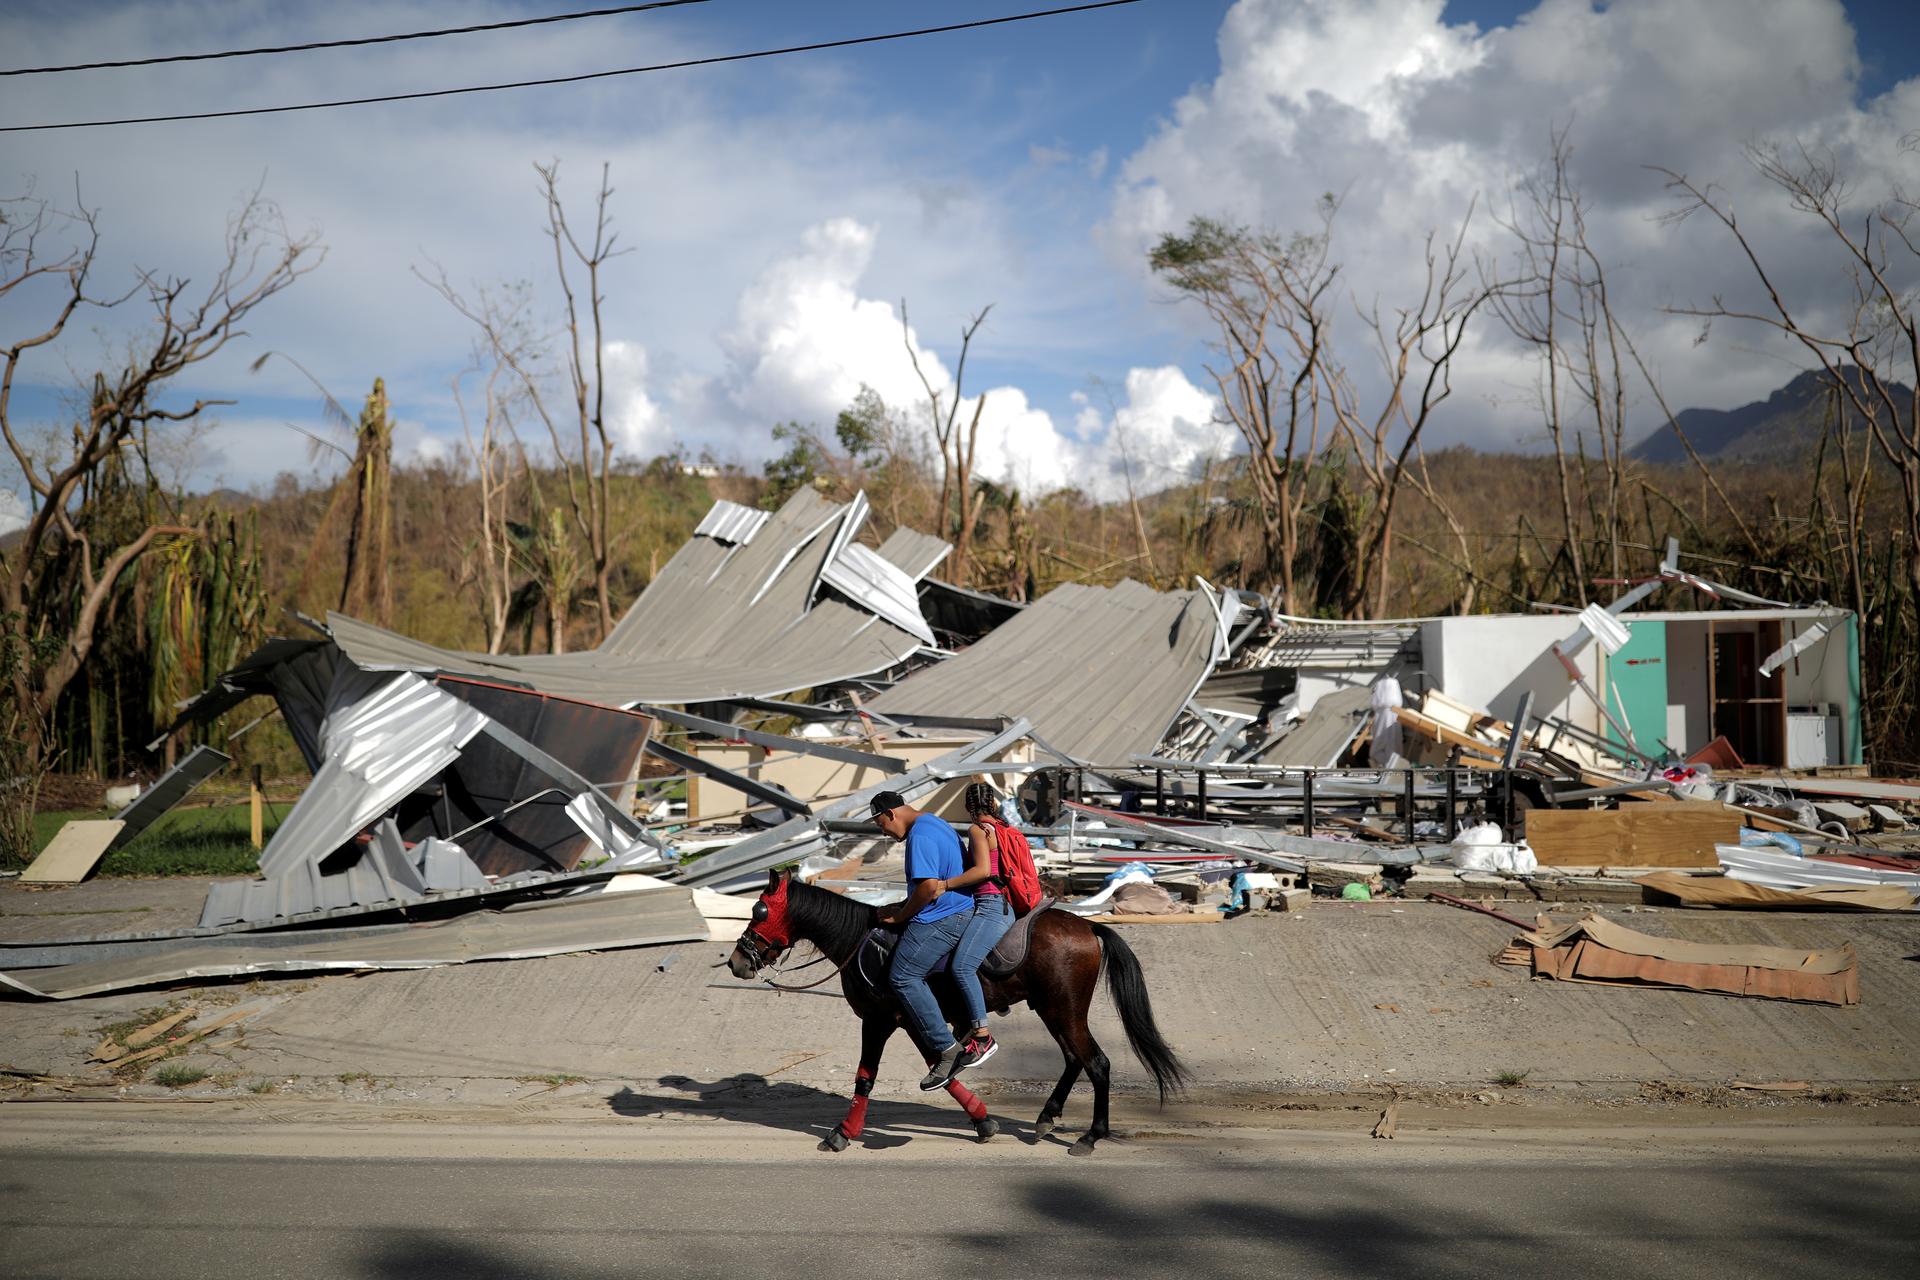 Local residents ride a horse by a destroyed building after Hurricane Maria in Jayuya, Puerto Rico